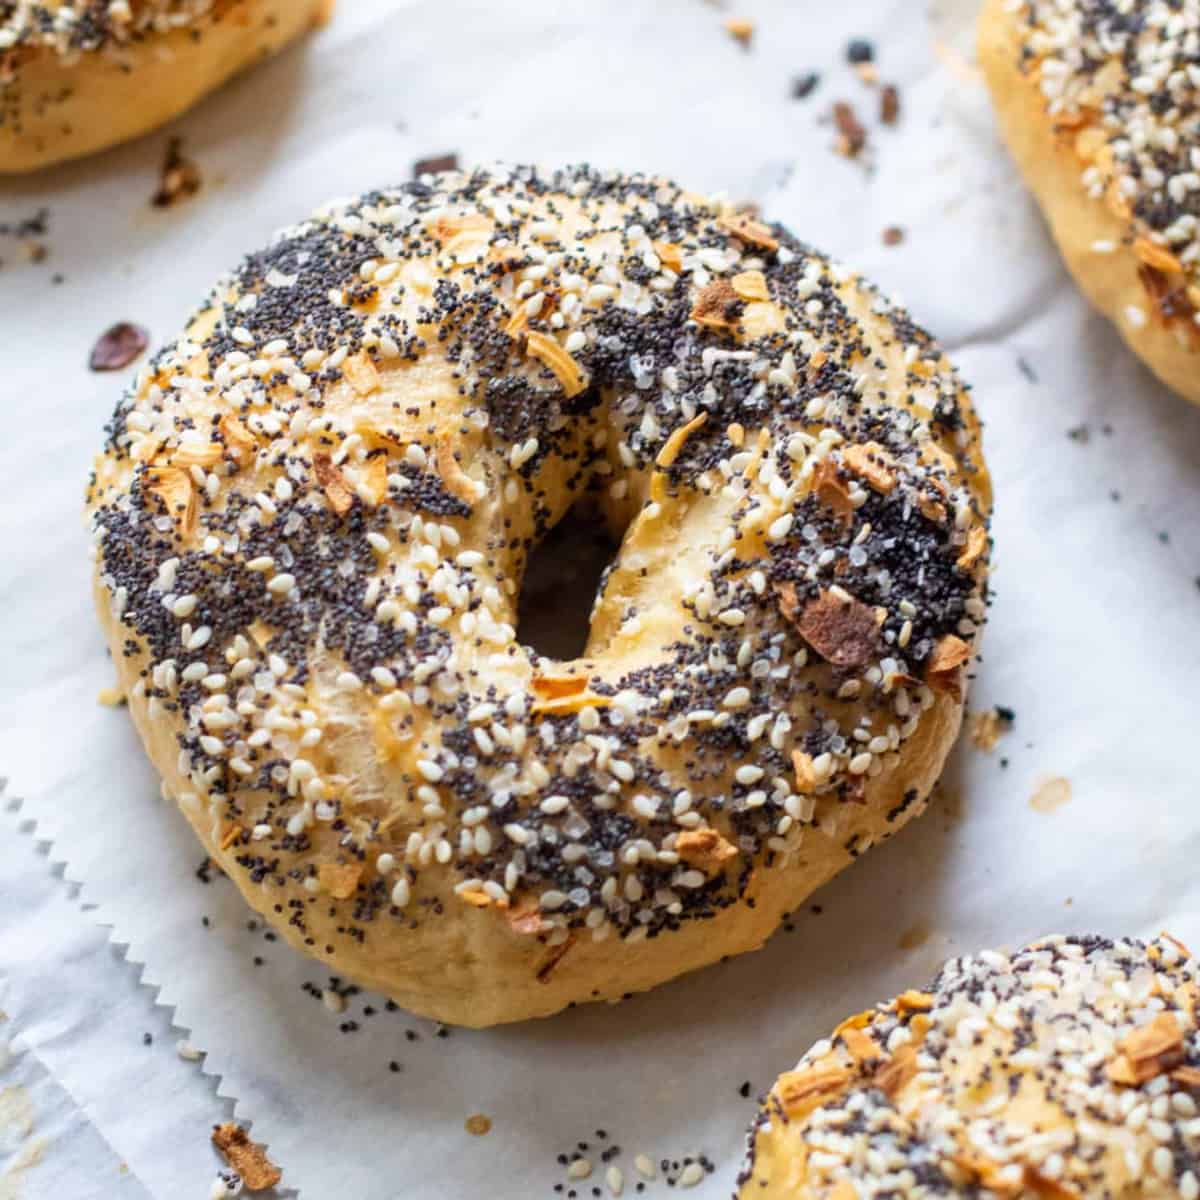 an everything bagel on parchment paper with others.